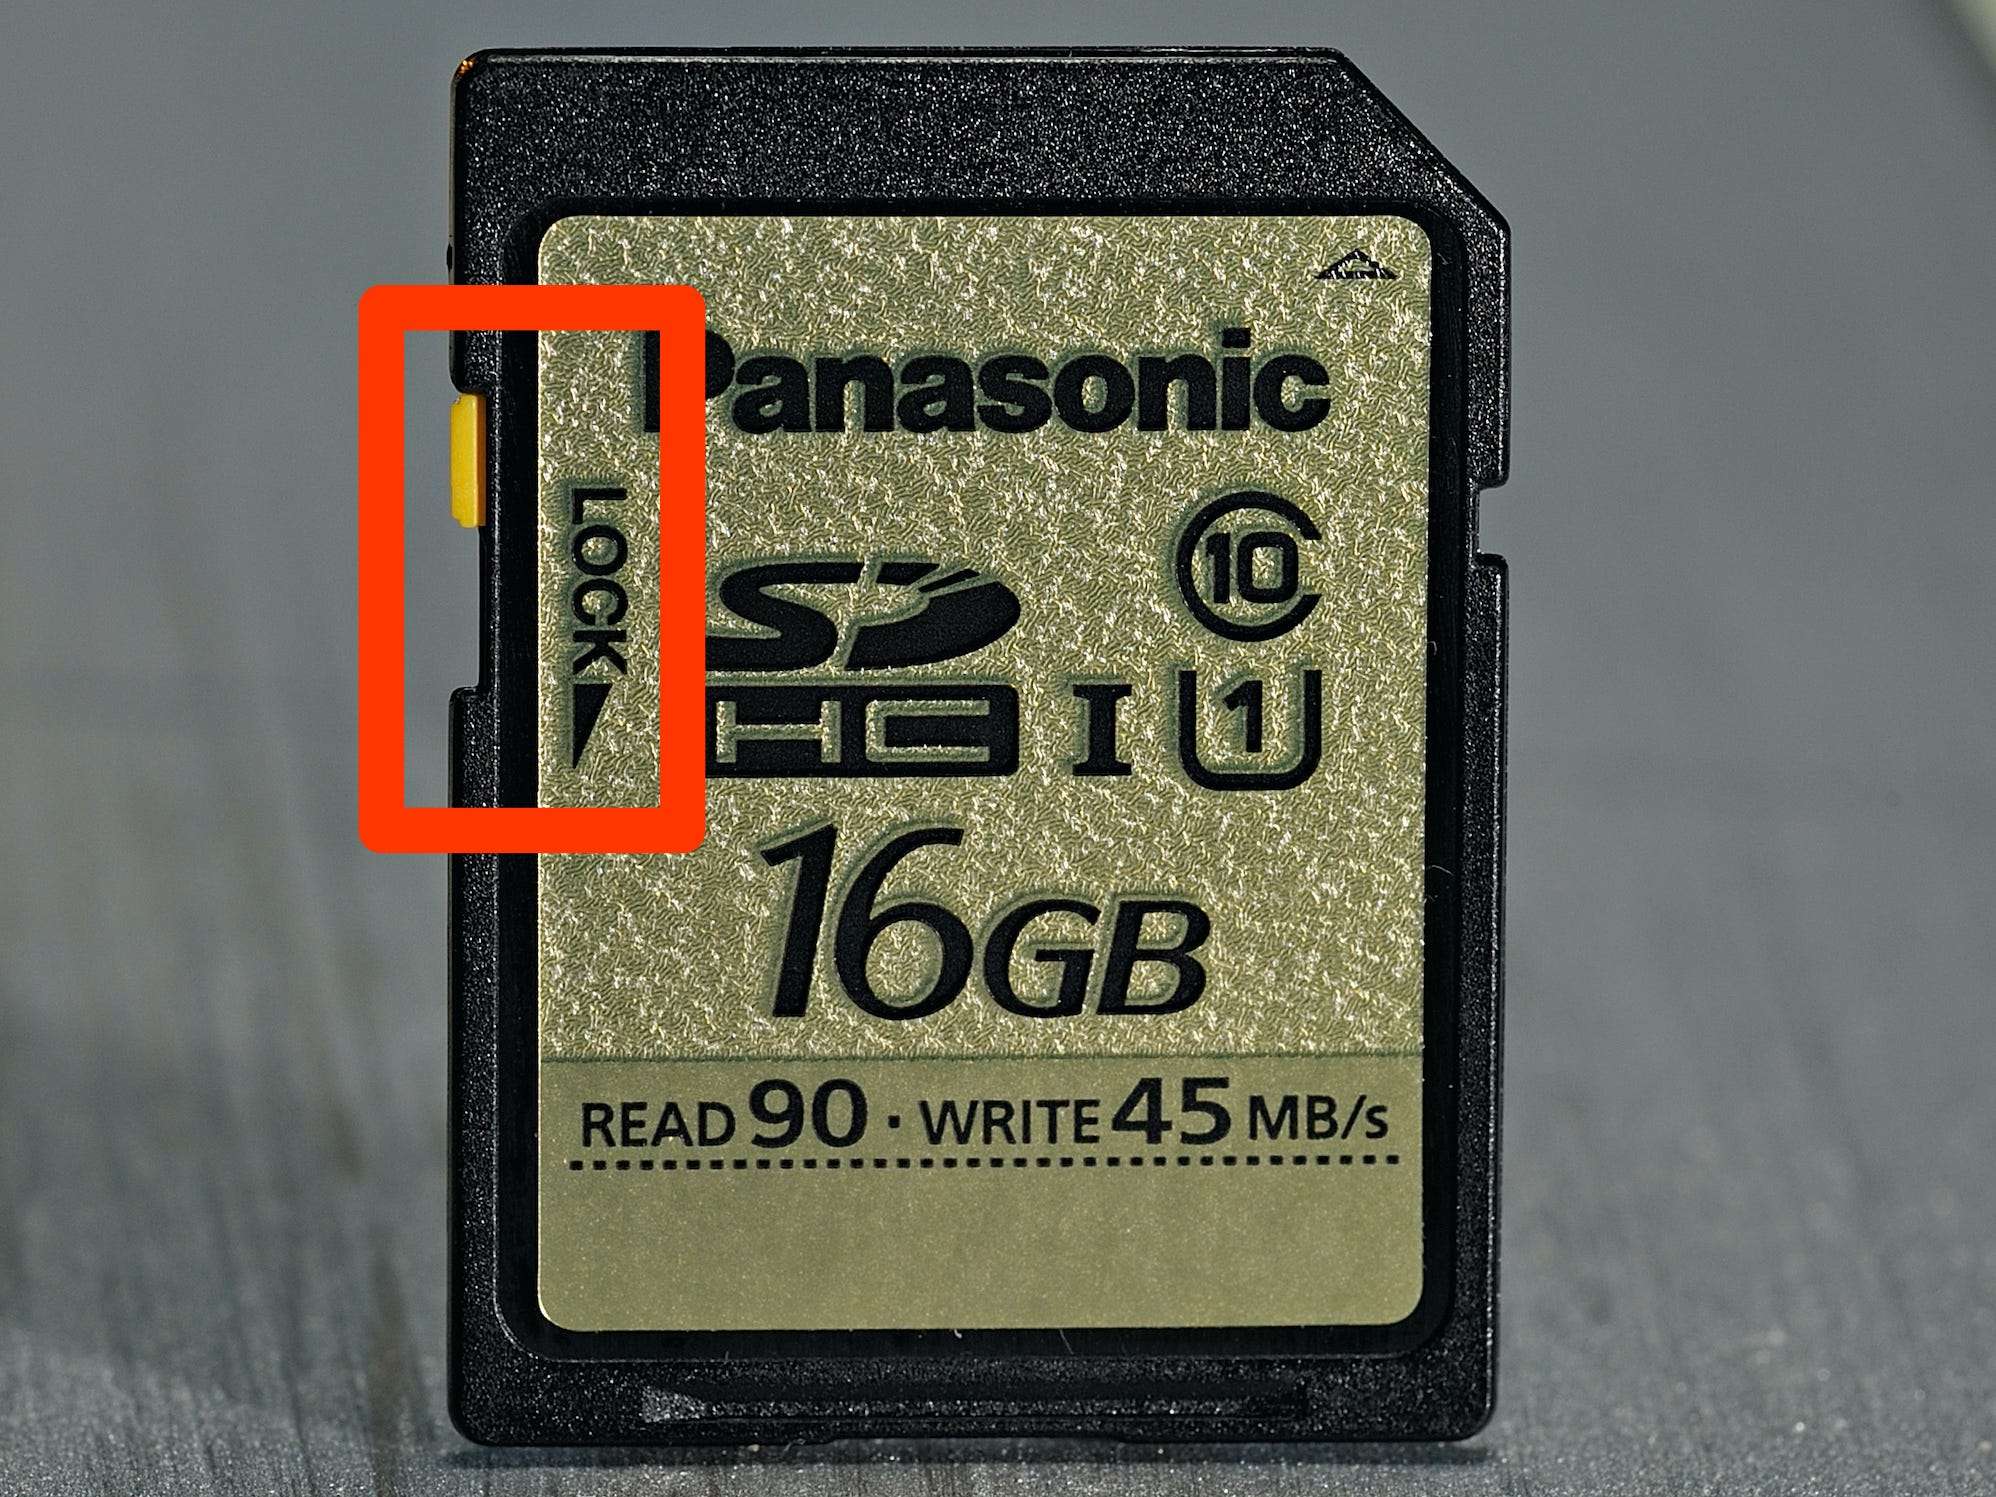 How to format an SD card and erase all of its data